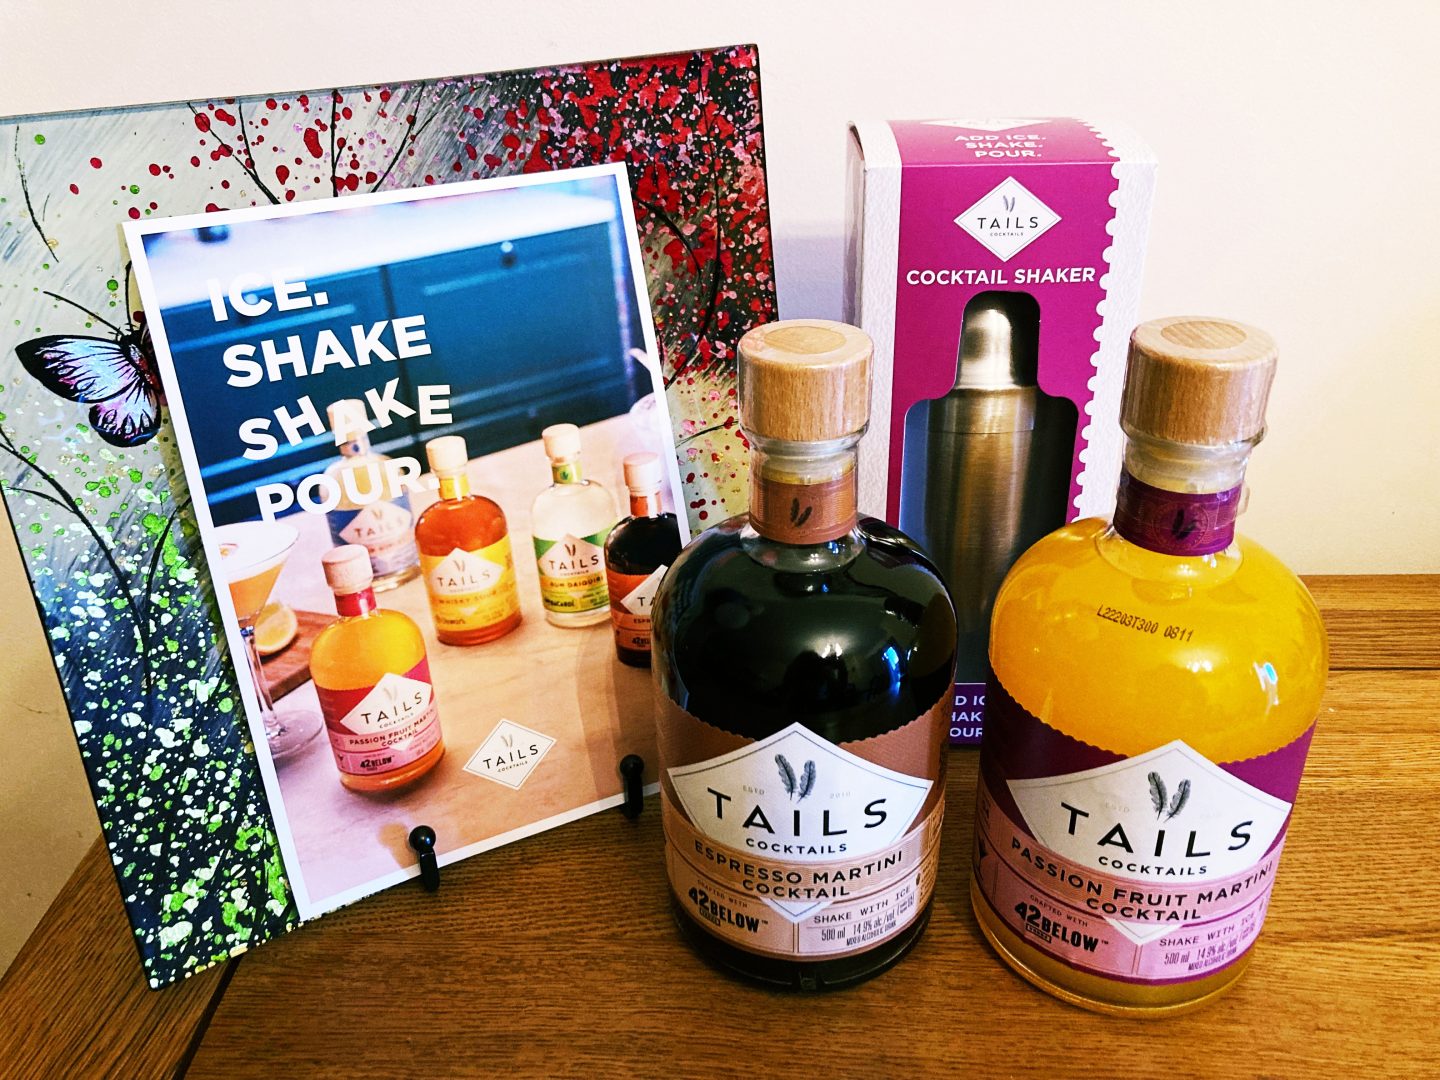 Two Tails Cocktails bottles, a cocktail shaker and a promotional leaflet.